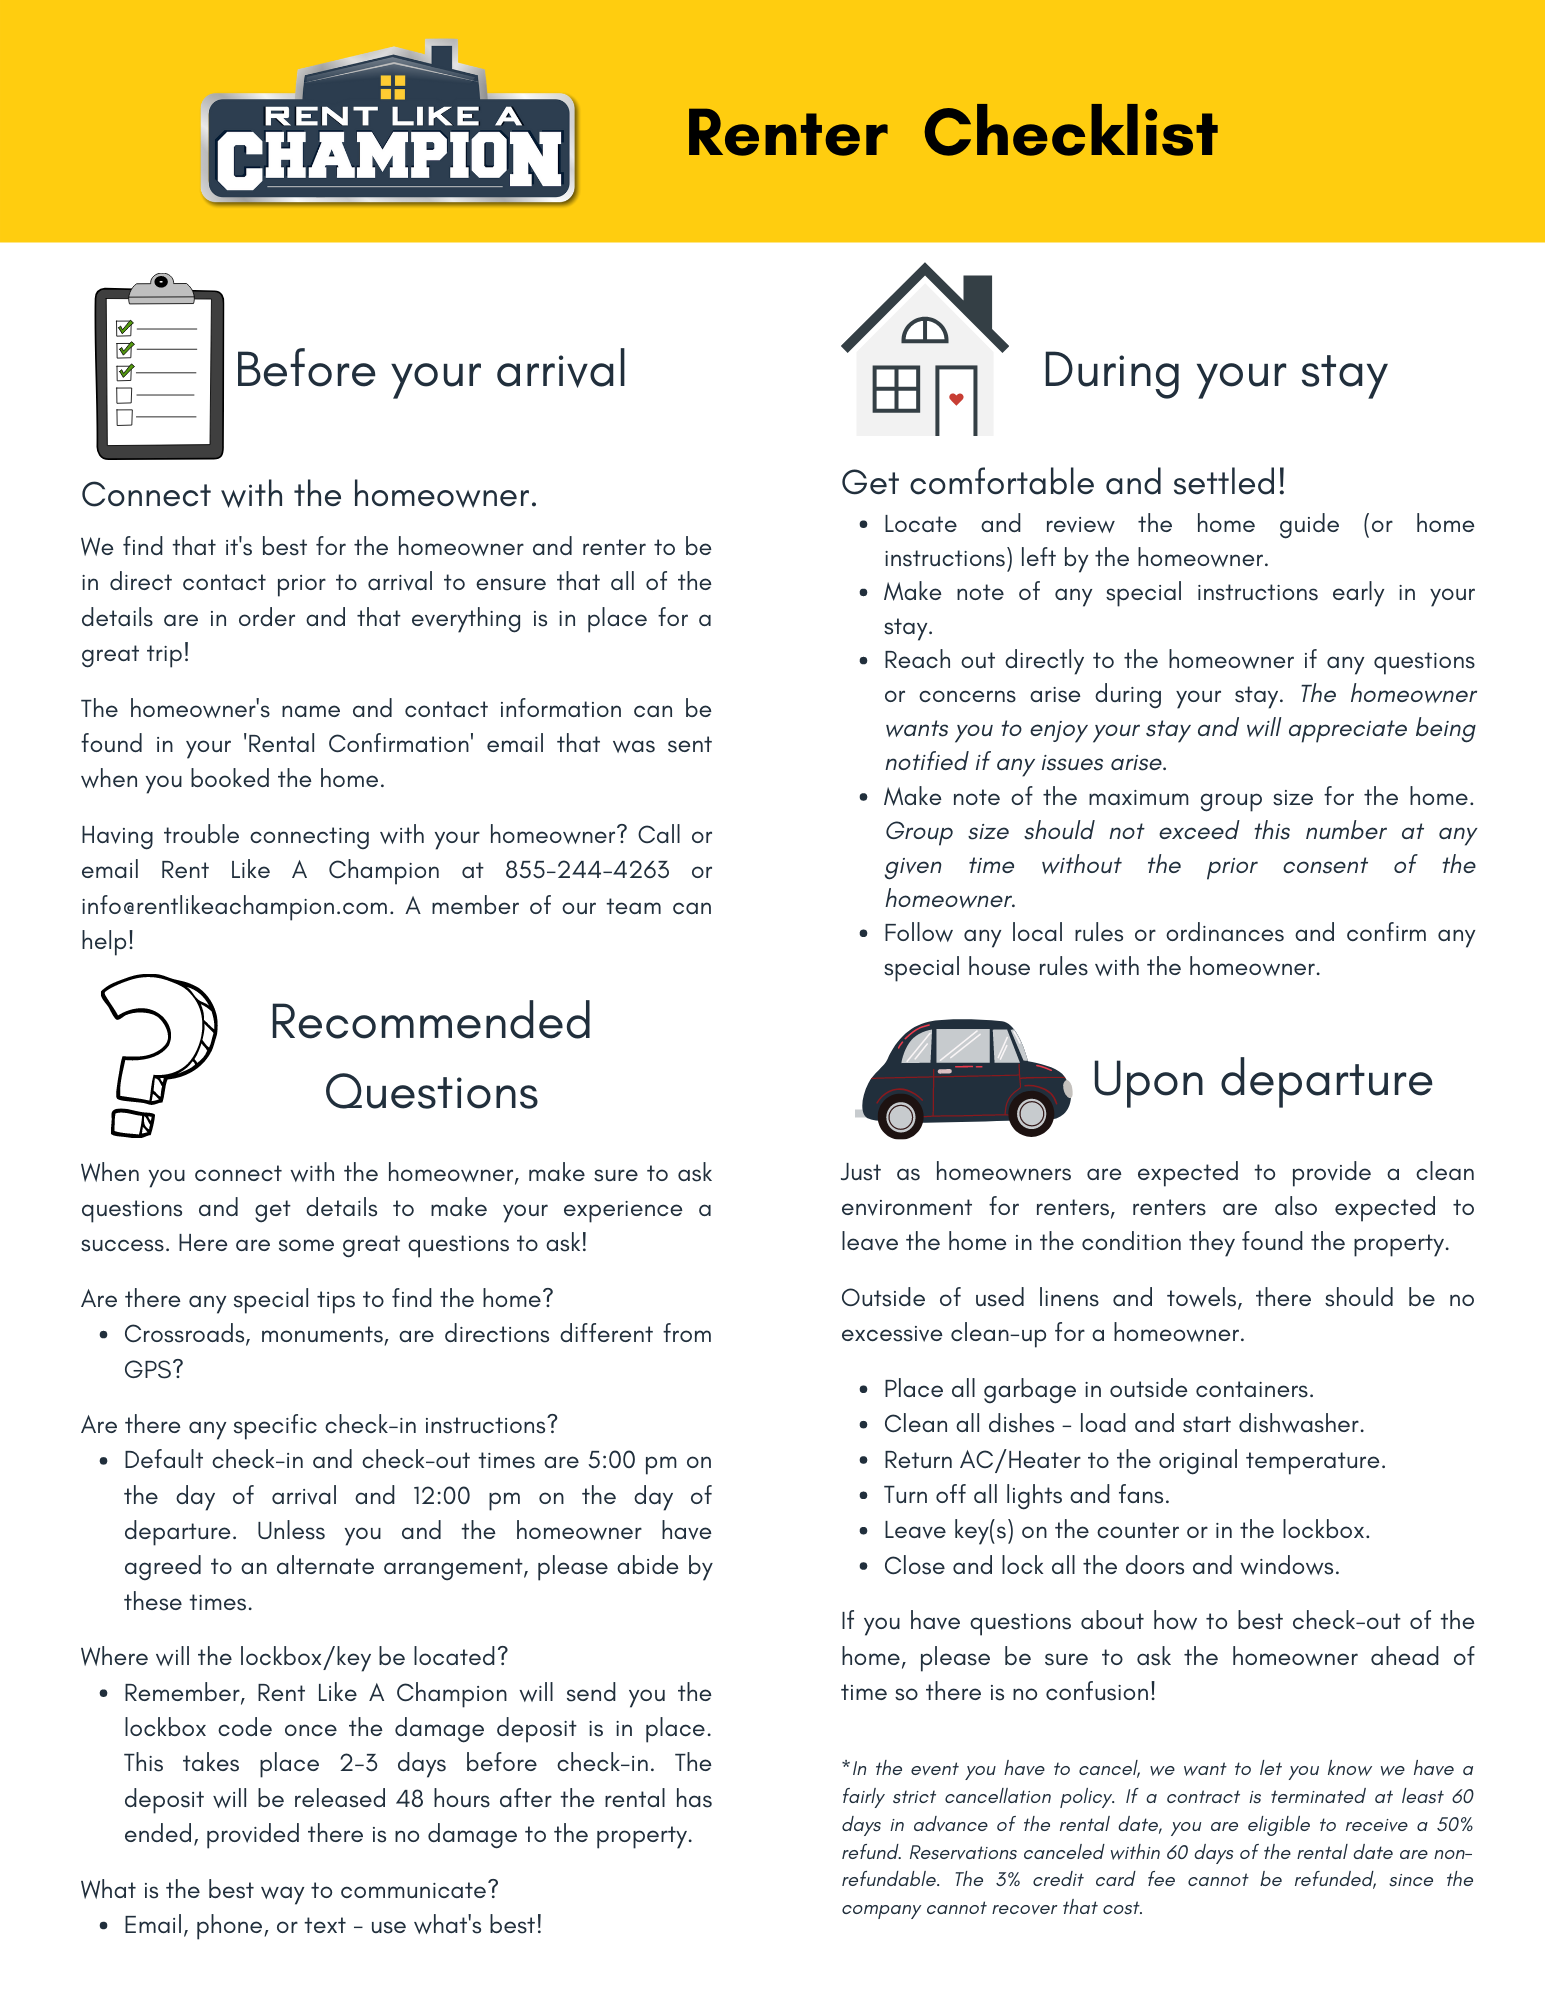 Expanded Renter Checklist - Rent Like A Champion version 2